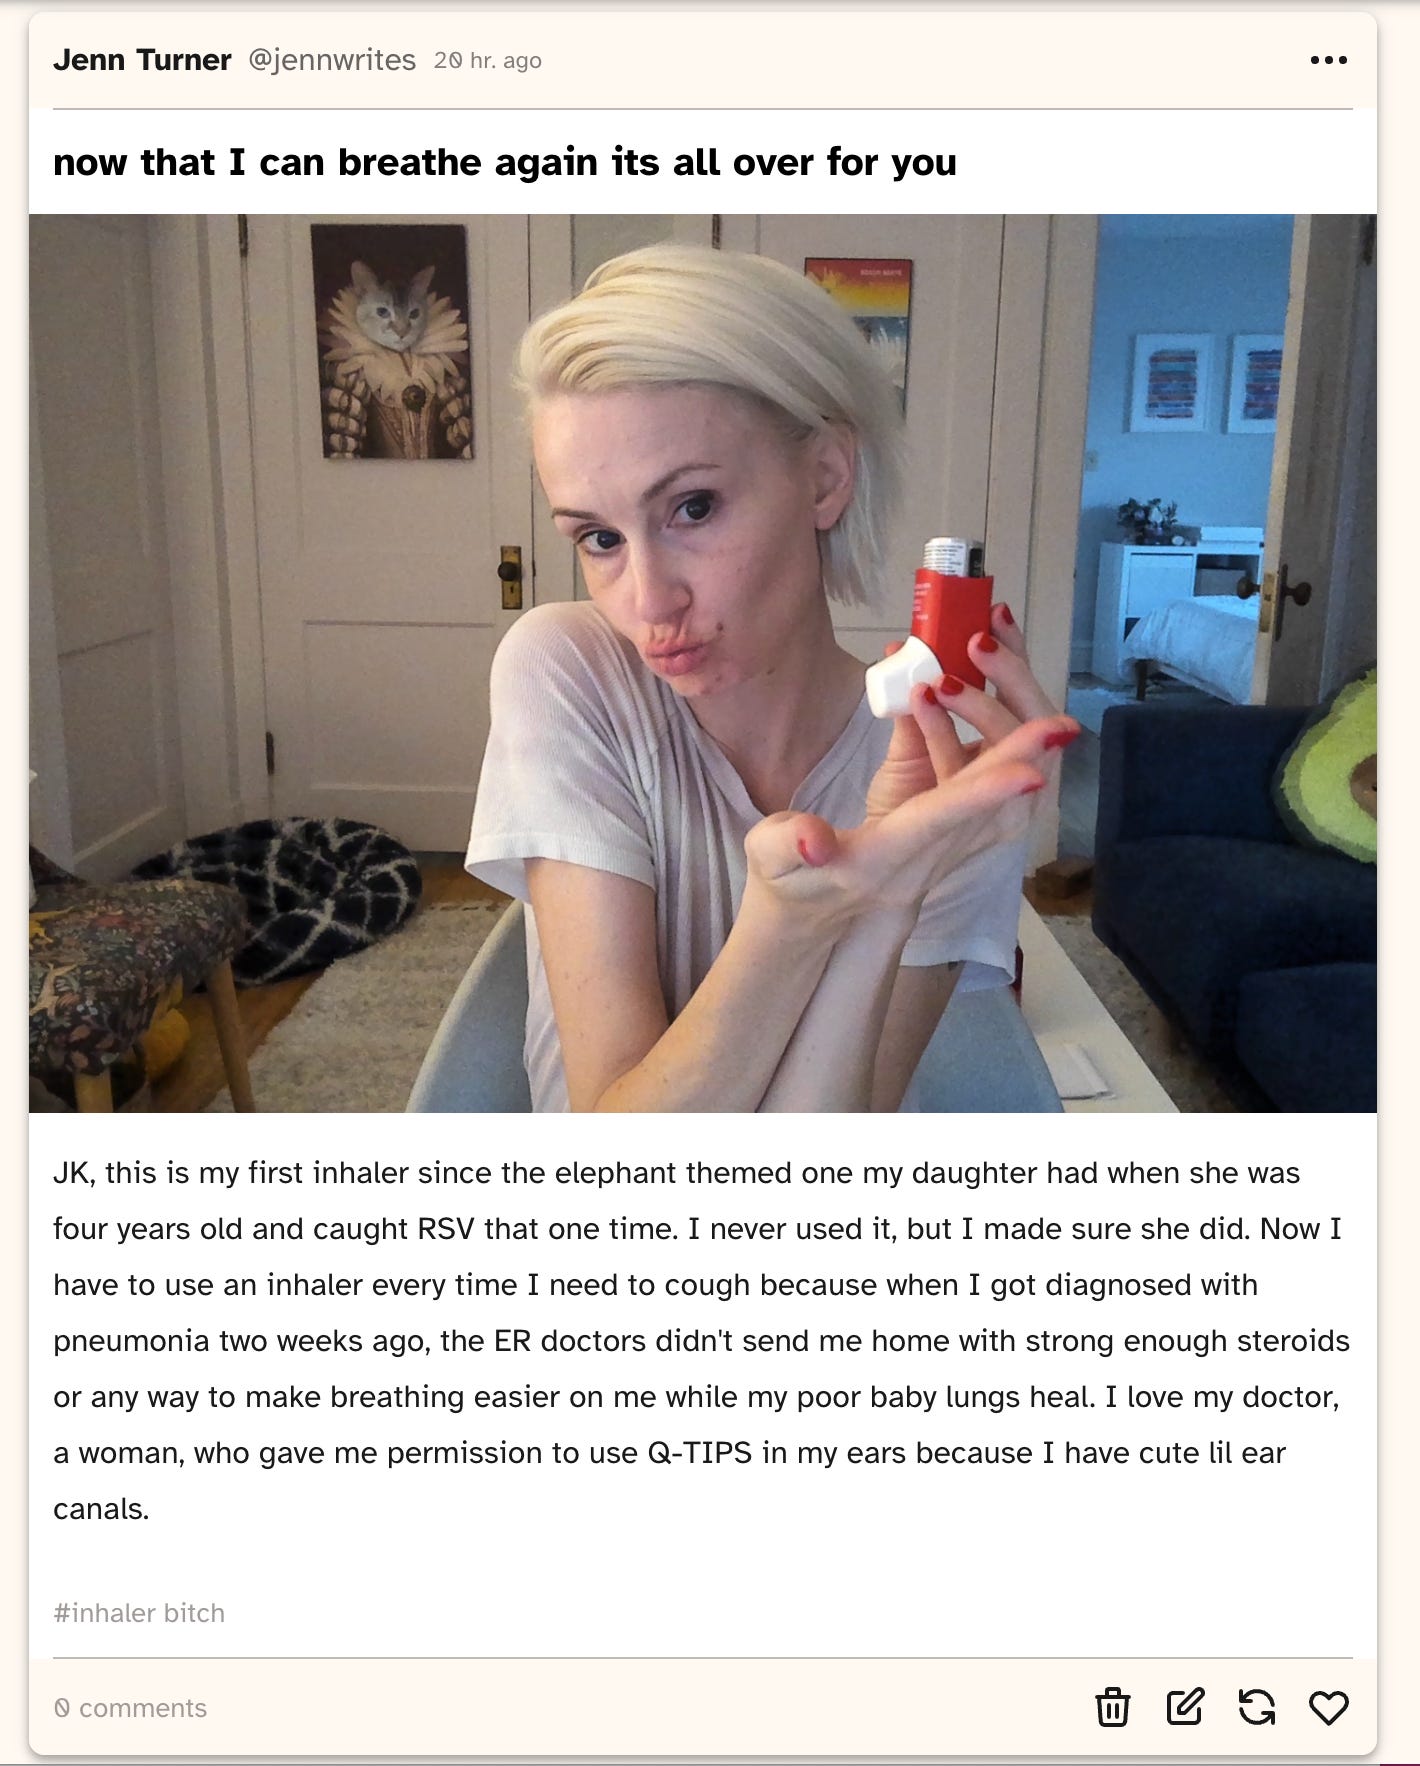 A white woman with blonde hair dark brown eyes makes a kissy face while holding up a red colored albuterol inhaler in her right hand. She has short red painted fingernails. In the background there is a room with 4 doors, a poster of a cat from the Elizabethan era with, a poster of a tabby cat djing, and an avocato pillow (a fluffy green avocado with a cat face on the pit). The open door behind her shows a guest bedroom with a white comforter on the bed, a white cube shelving unit full of crap and some art work made from old paintings of her daughter's that she cut into strips and repurposed as new pieces.